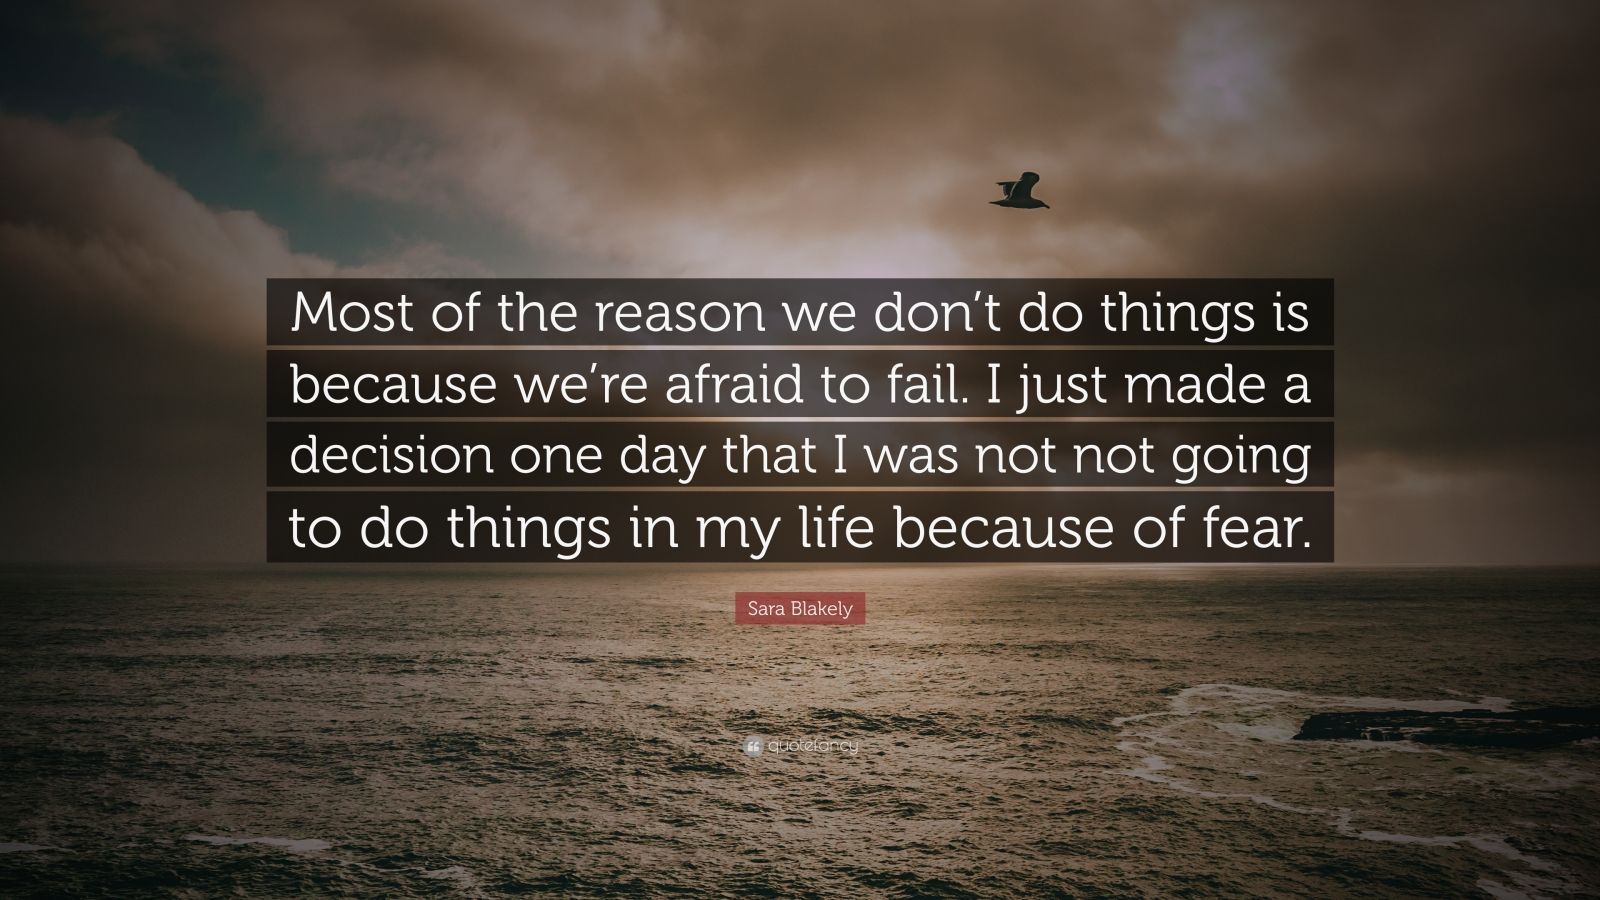 Sara Blakely Quote: “Most of the reason we don’t do things is because ...